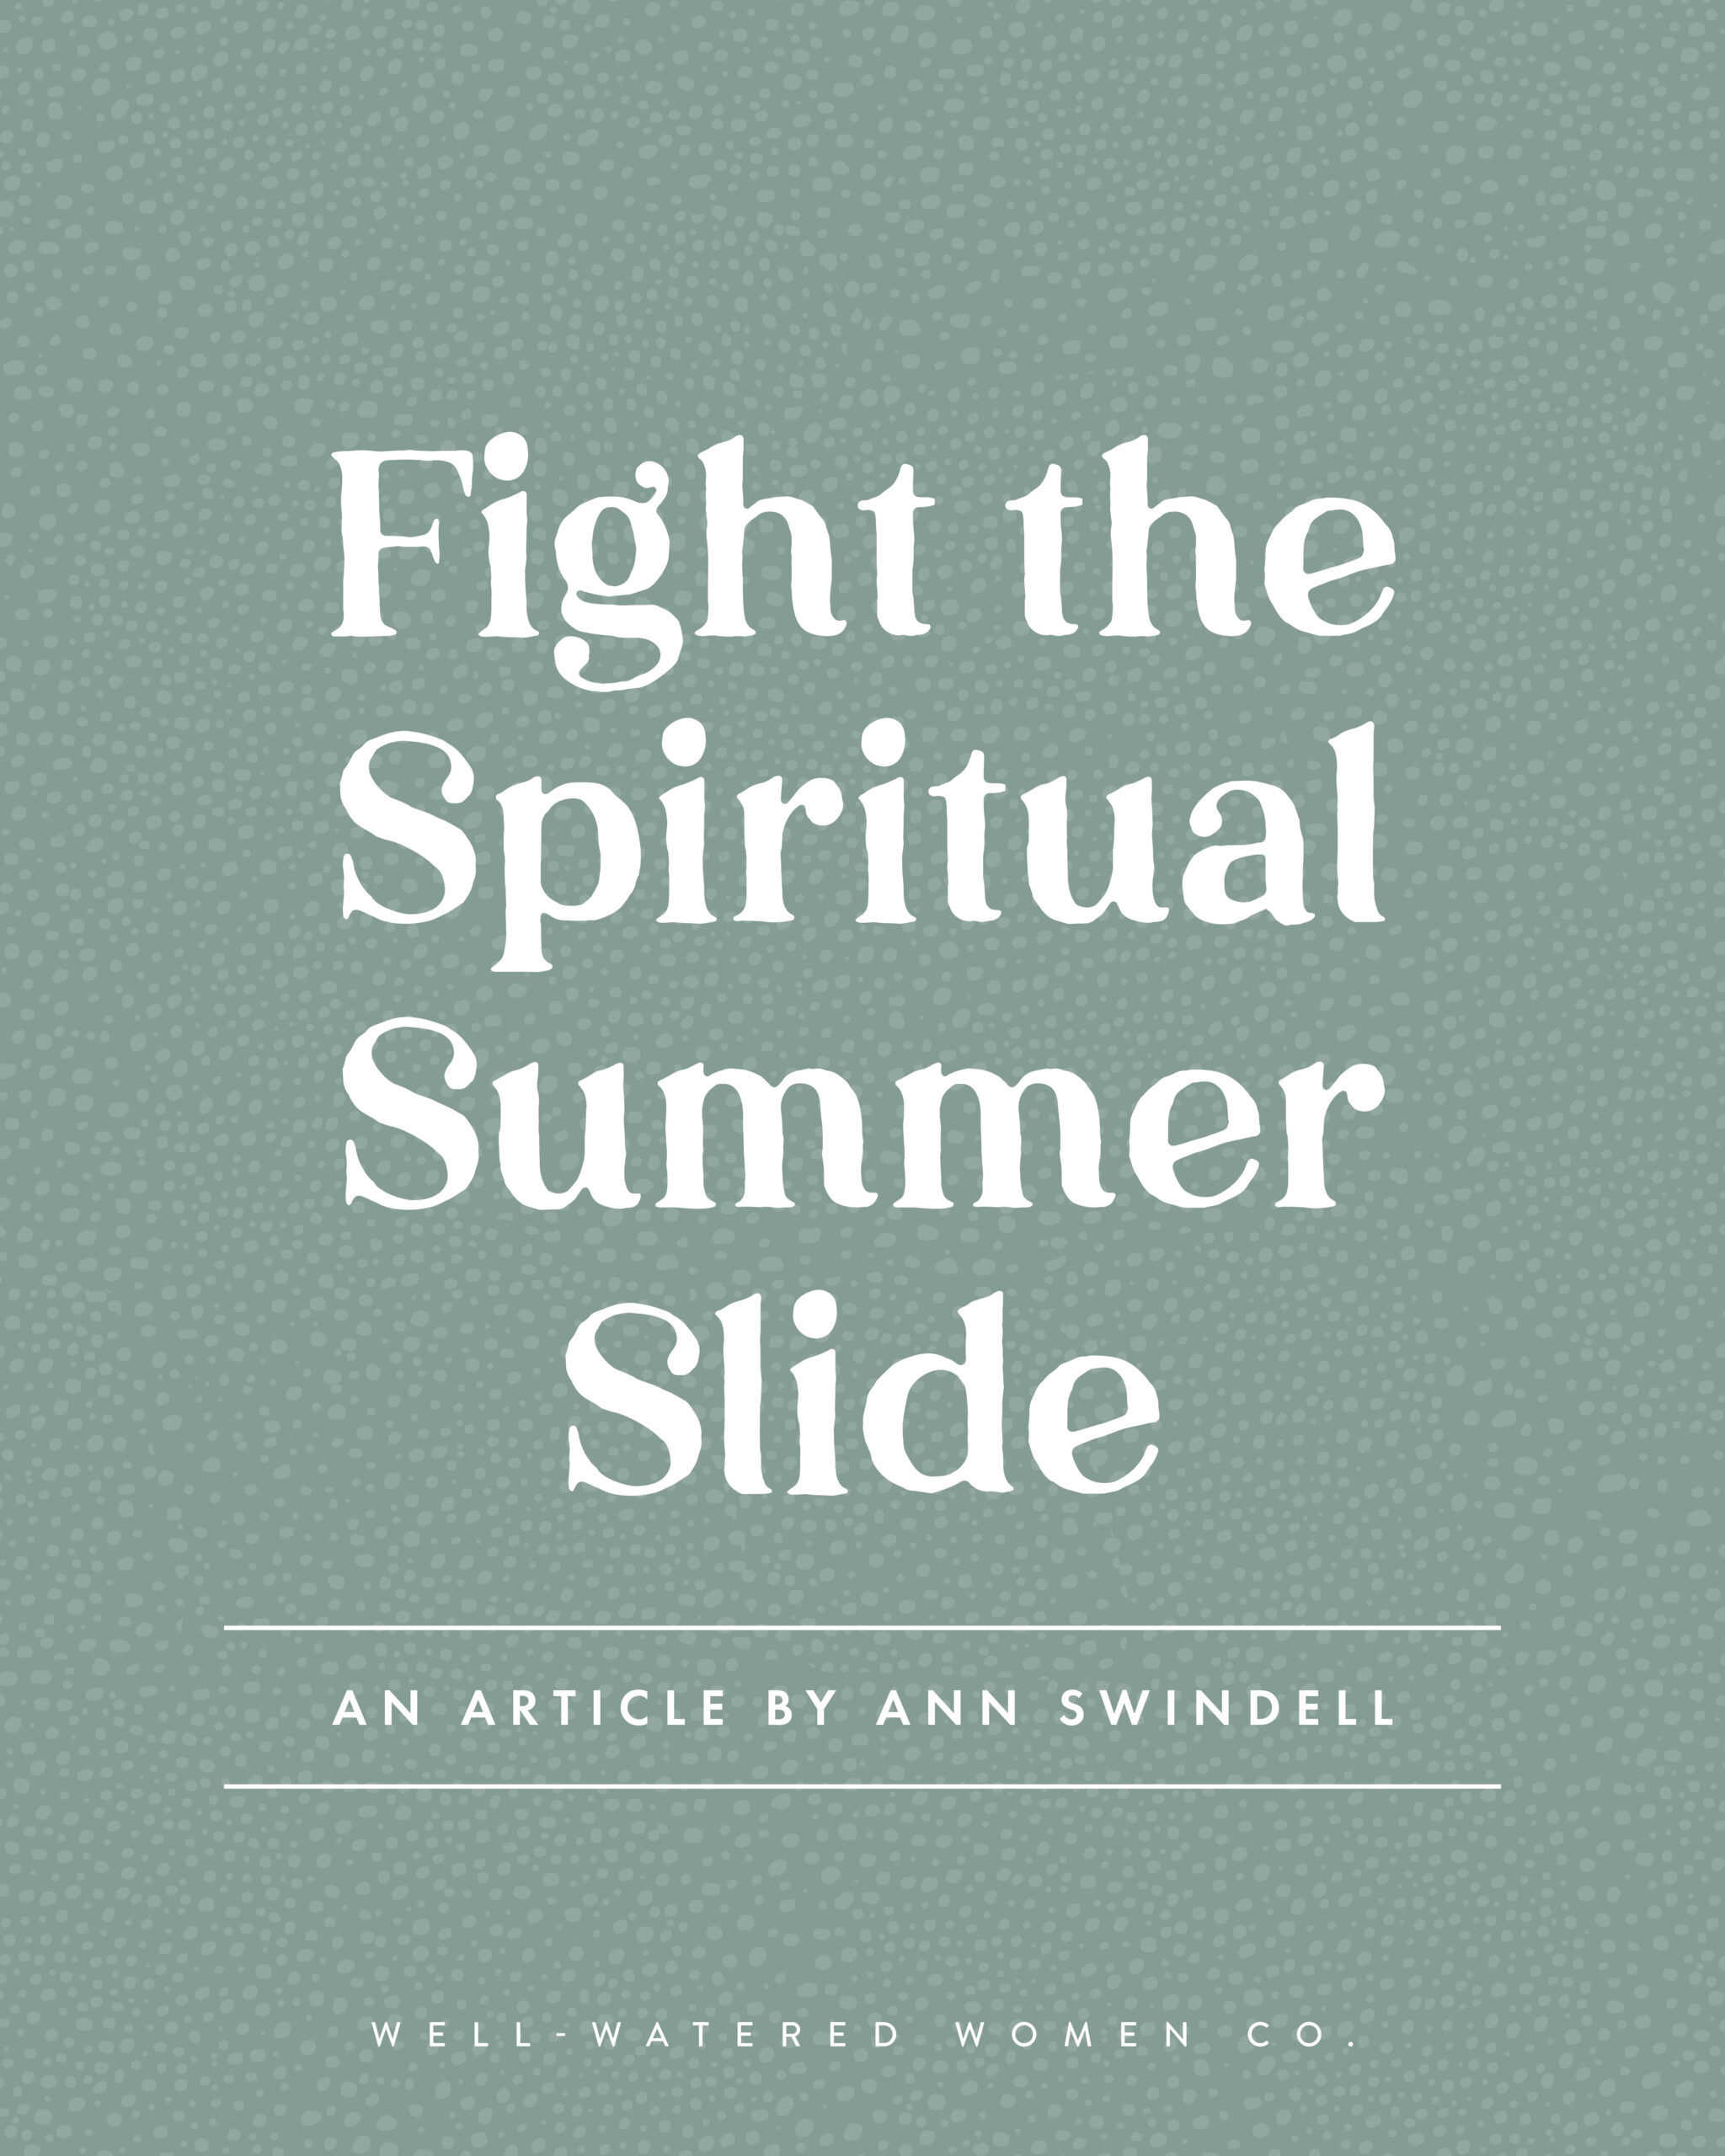 Fight the Spiritual Summer Slide - an article from Well-Watered Women